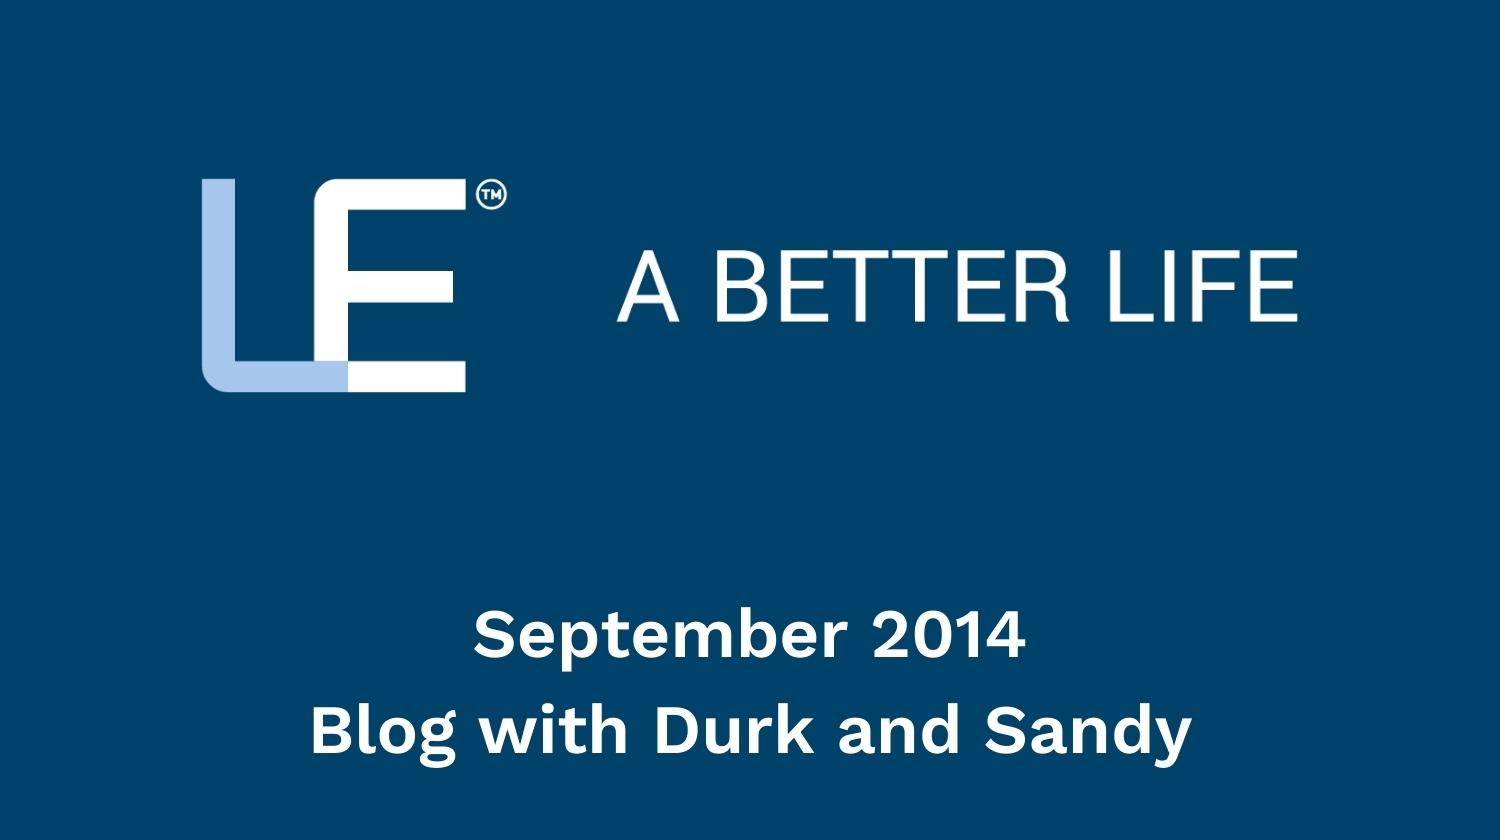 September 2014 Blog with Durk and Sandy